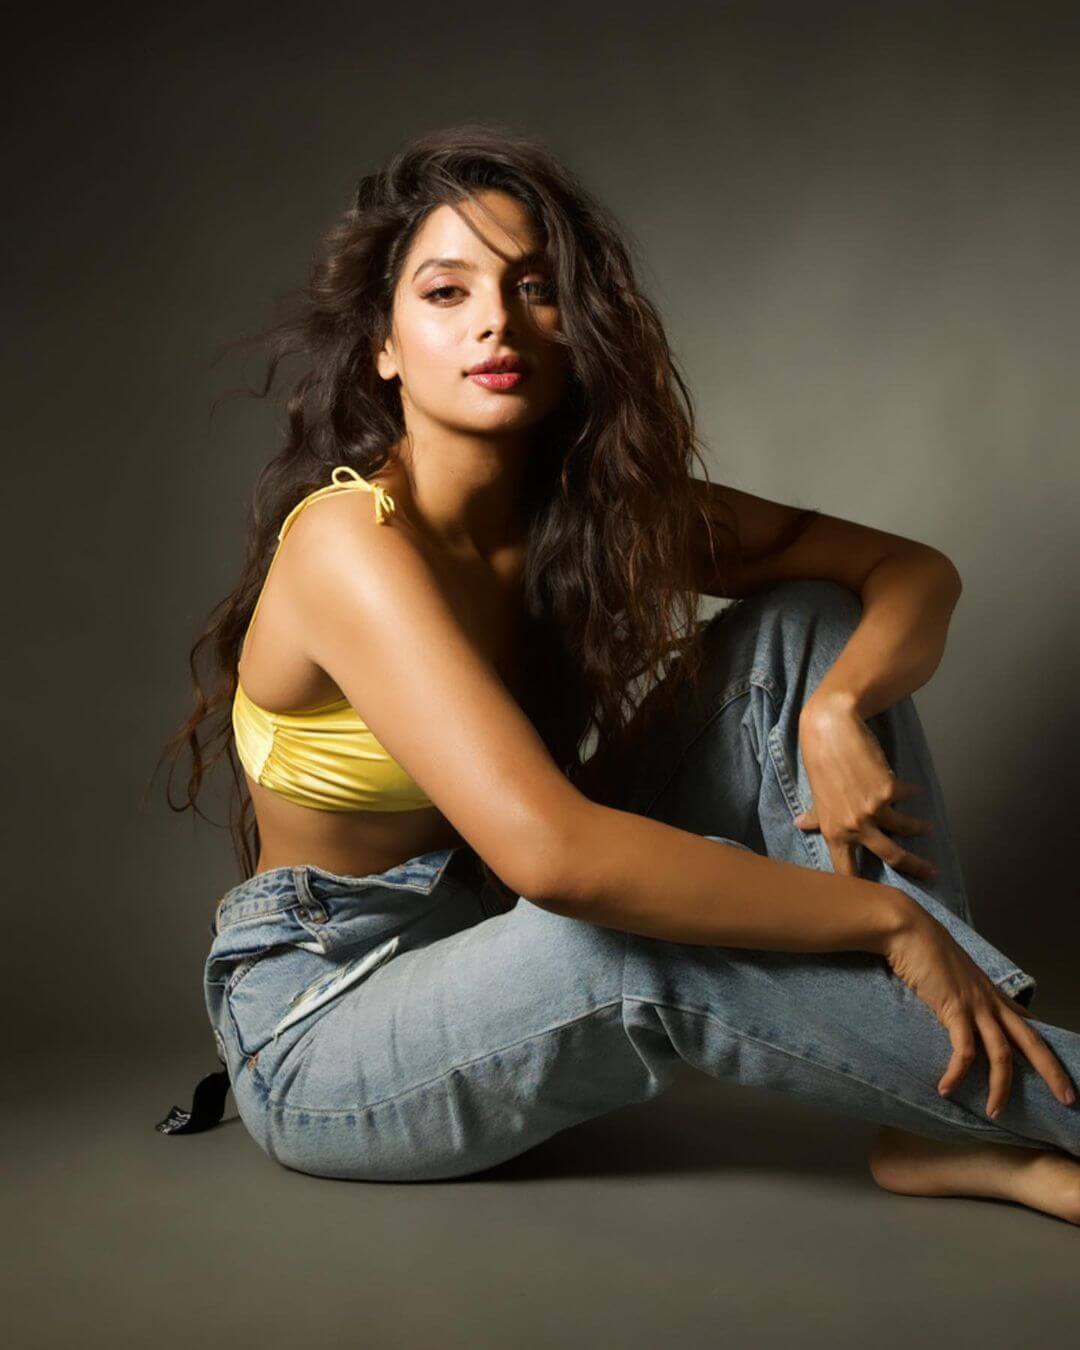 Tanya Hope In Yellow Tie Up Top With Denim Jeans Can Be your Casual Outfit Too Tanya Hope Hot and Sizzling Looks Inspo